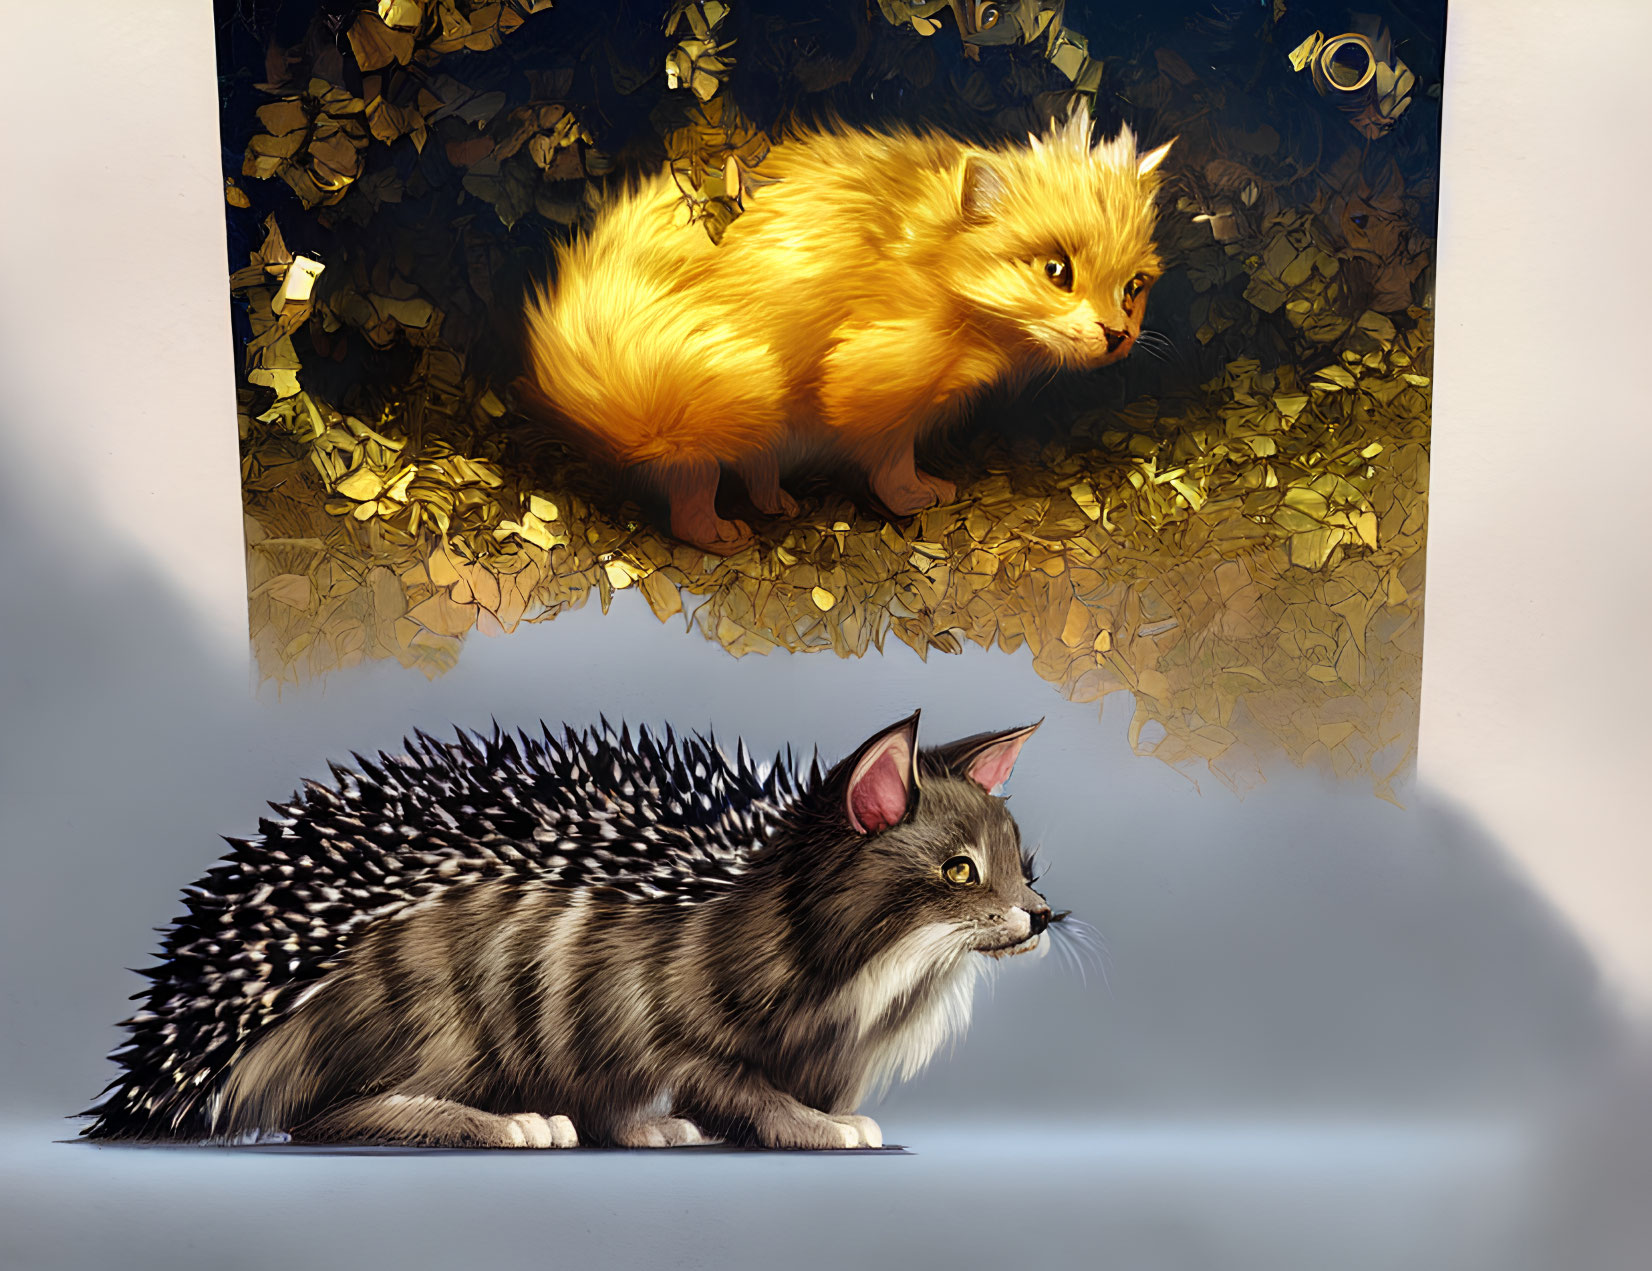 Whimsical digital painting: fluffy yellow creature and hedgehog-cat hybrid in autumn scene